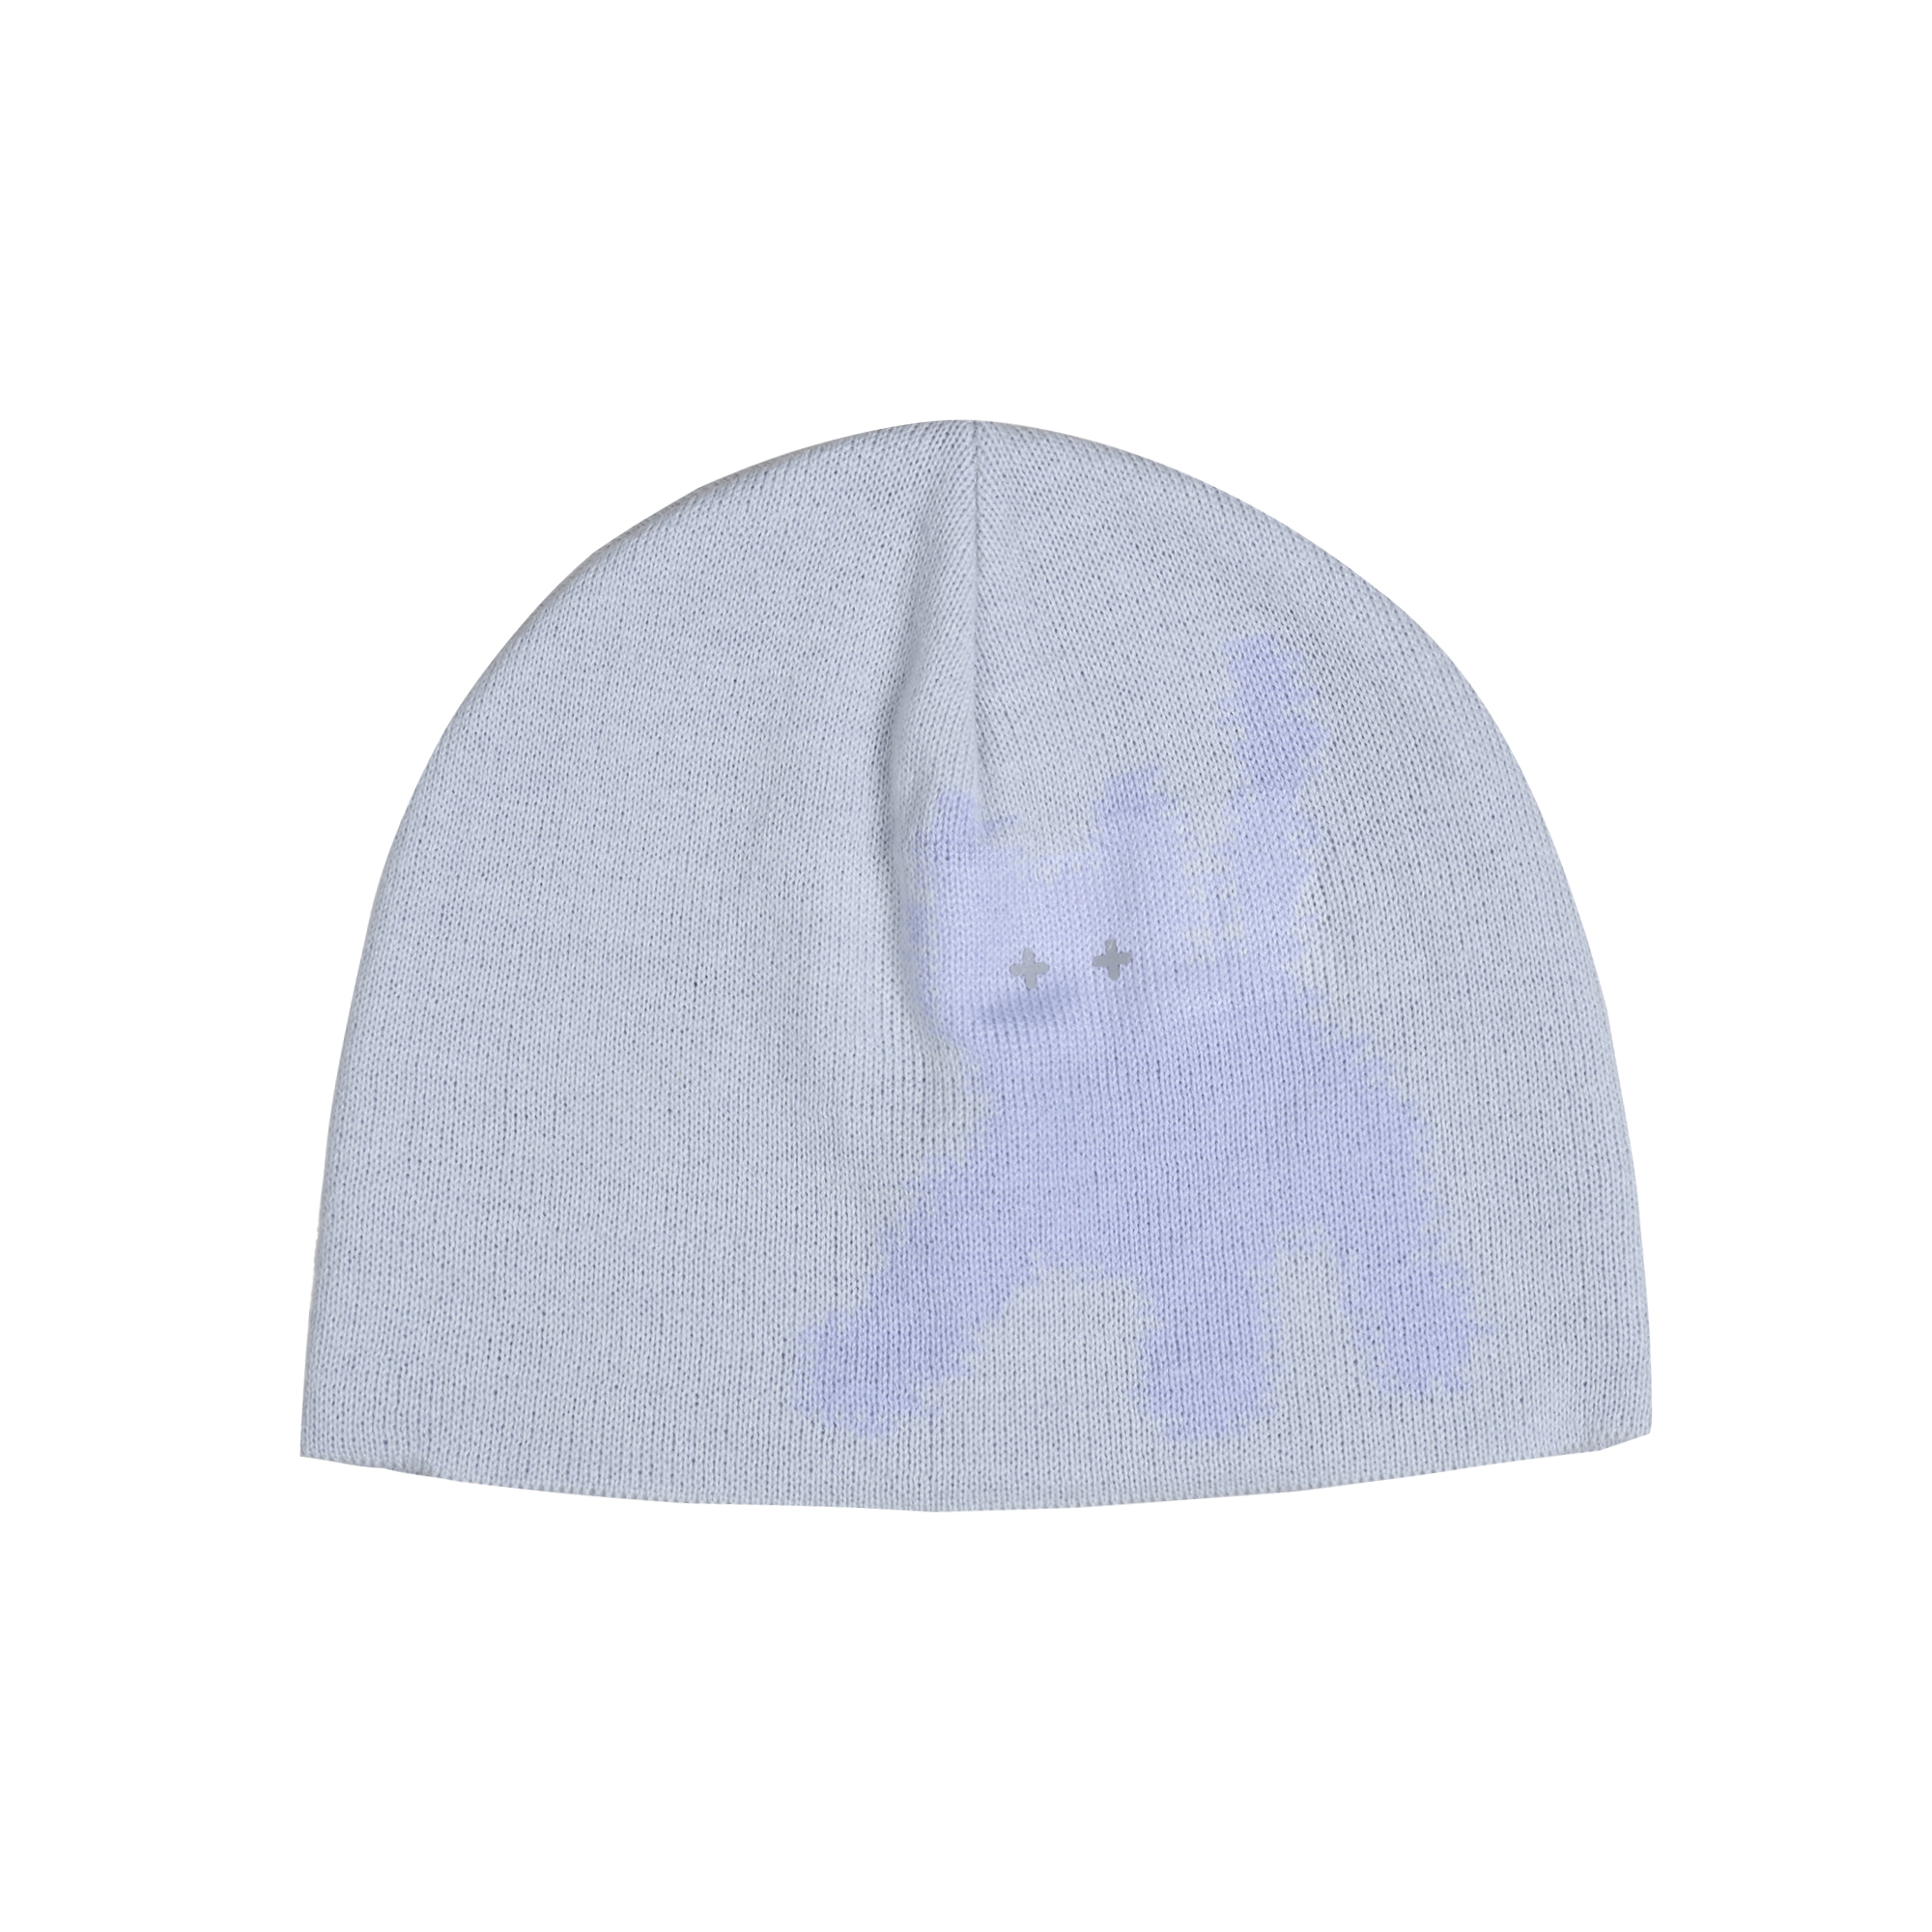 FLASHED CATS EYE BEANIE - [COOL GREY]